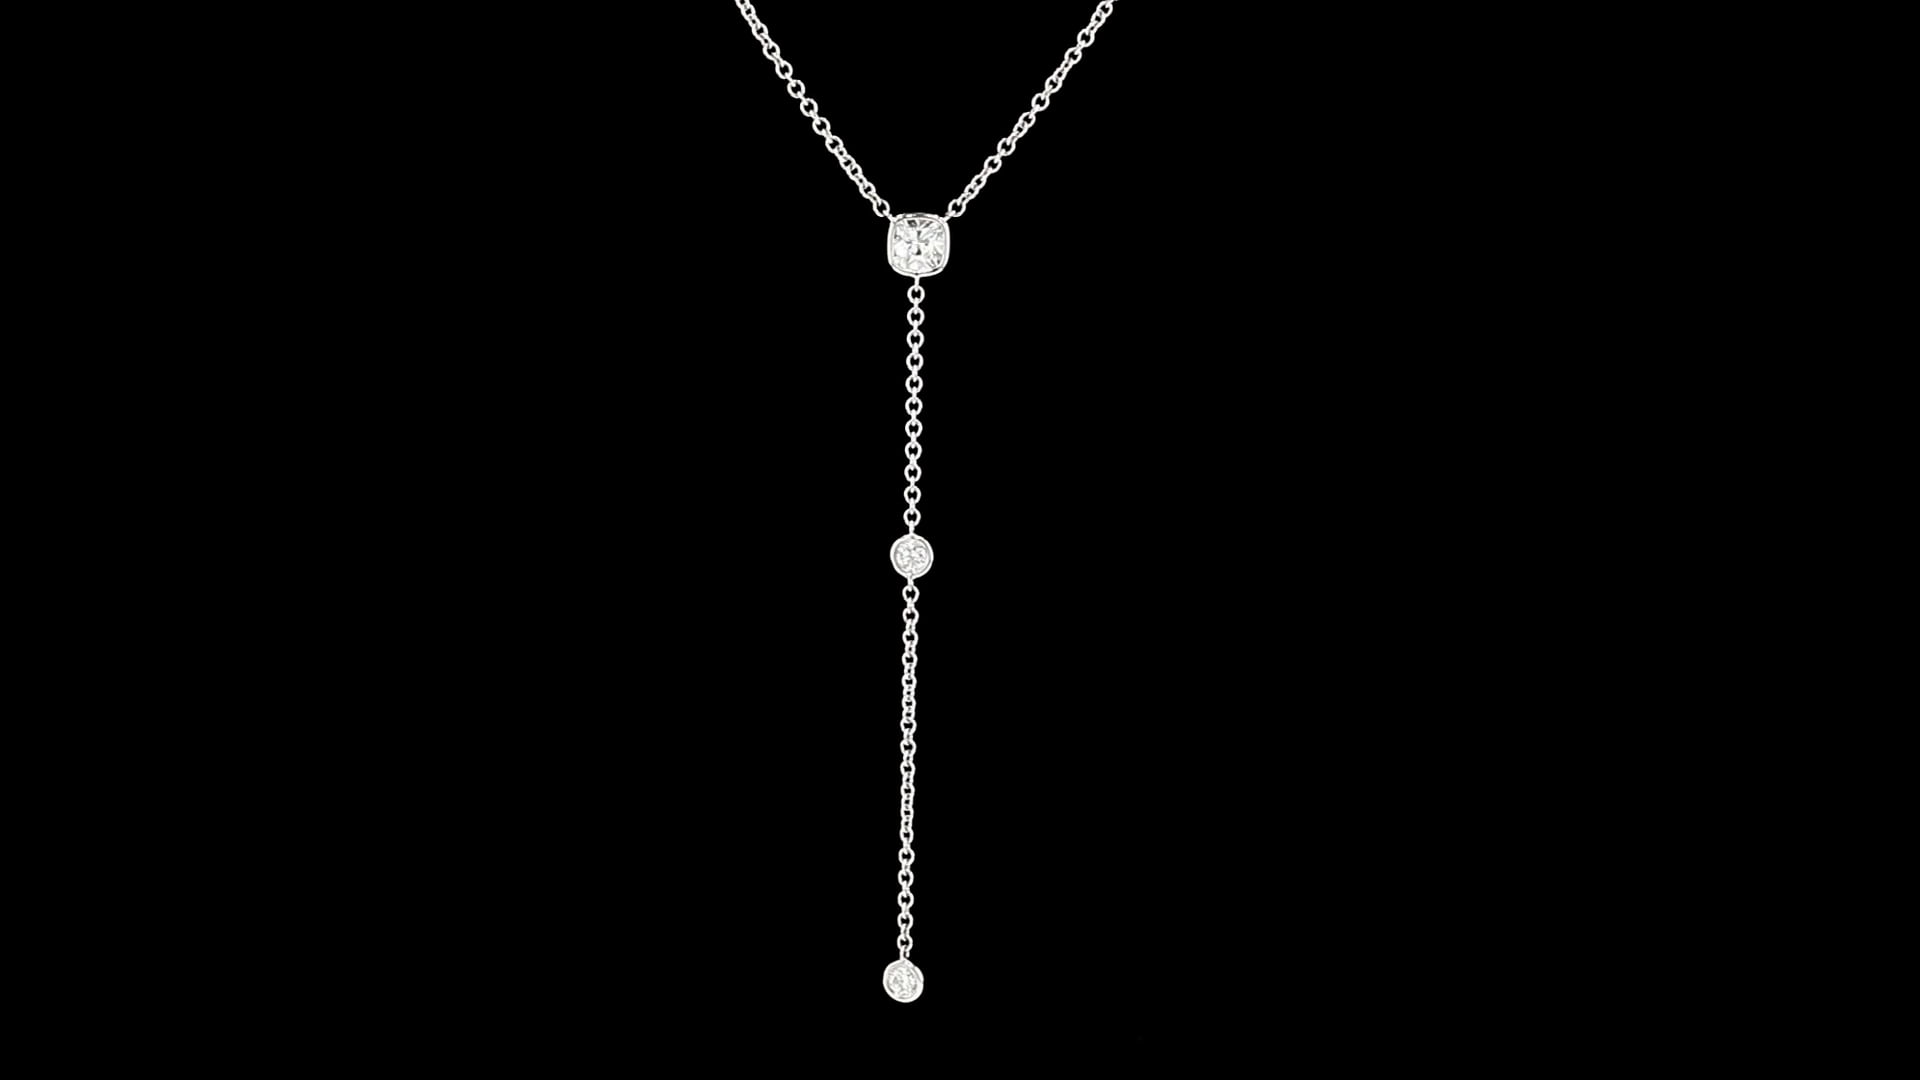 Initial Charm Necklace in 18K White Gold with Diamond A | David Yurman